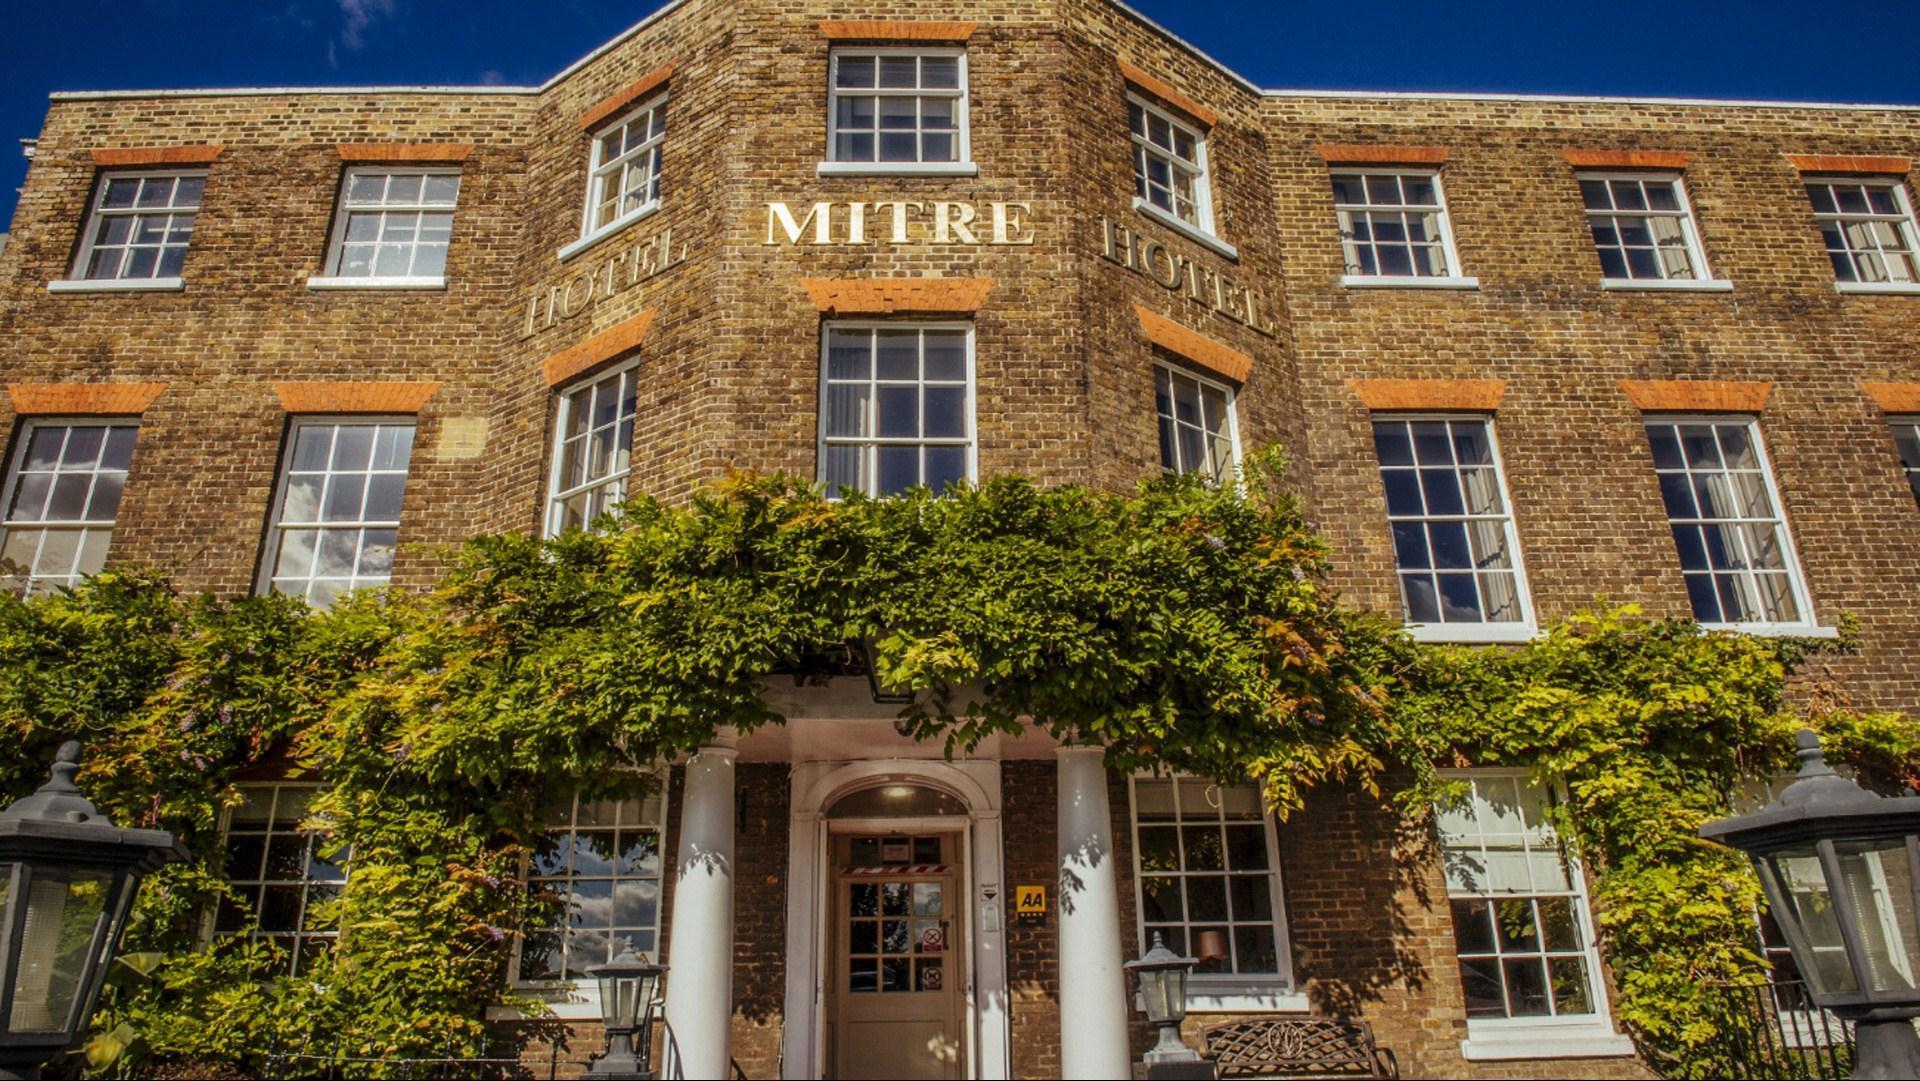 The Mitre Hotel in Molesey, GB1